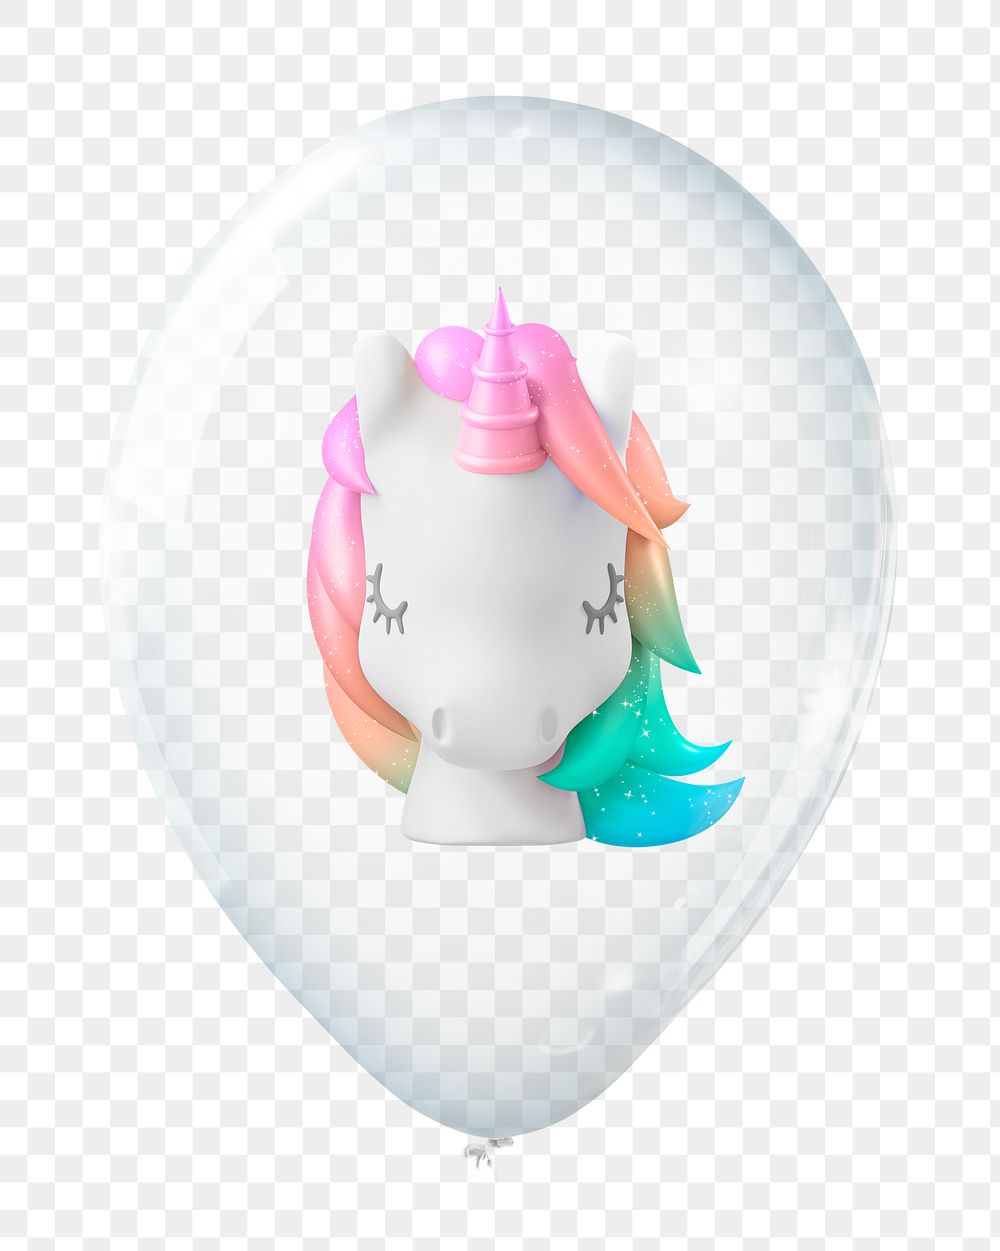 Unicorn png sticker, animal in clear balloon, transparent background